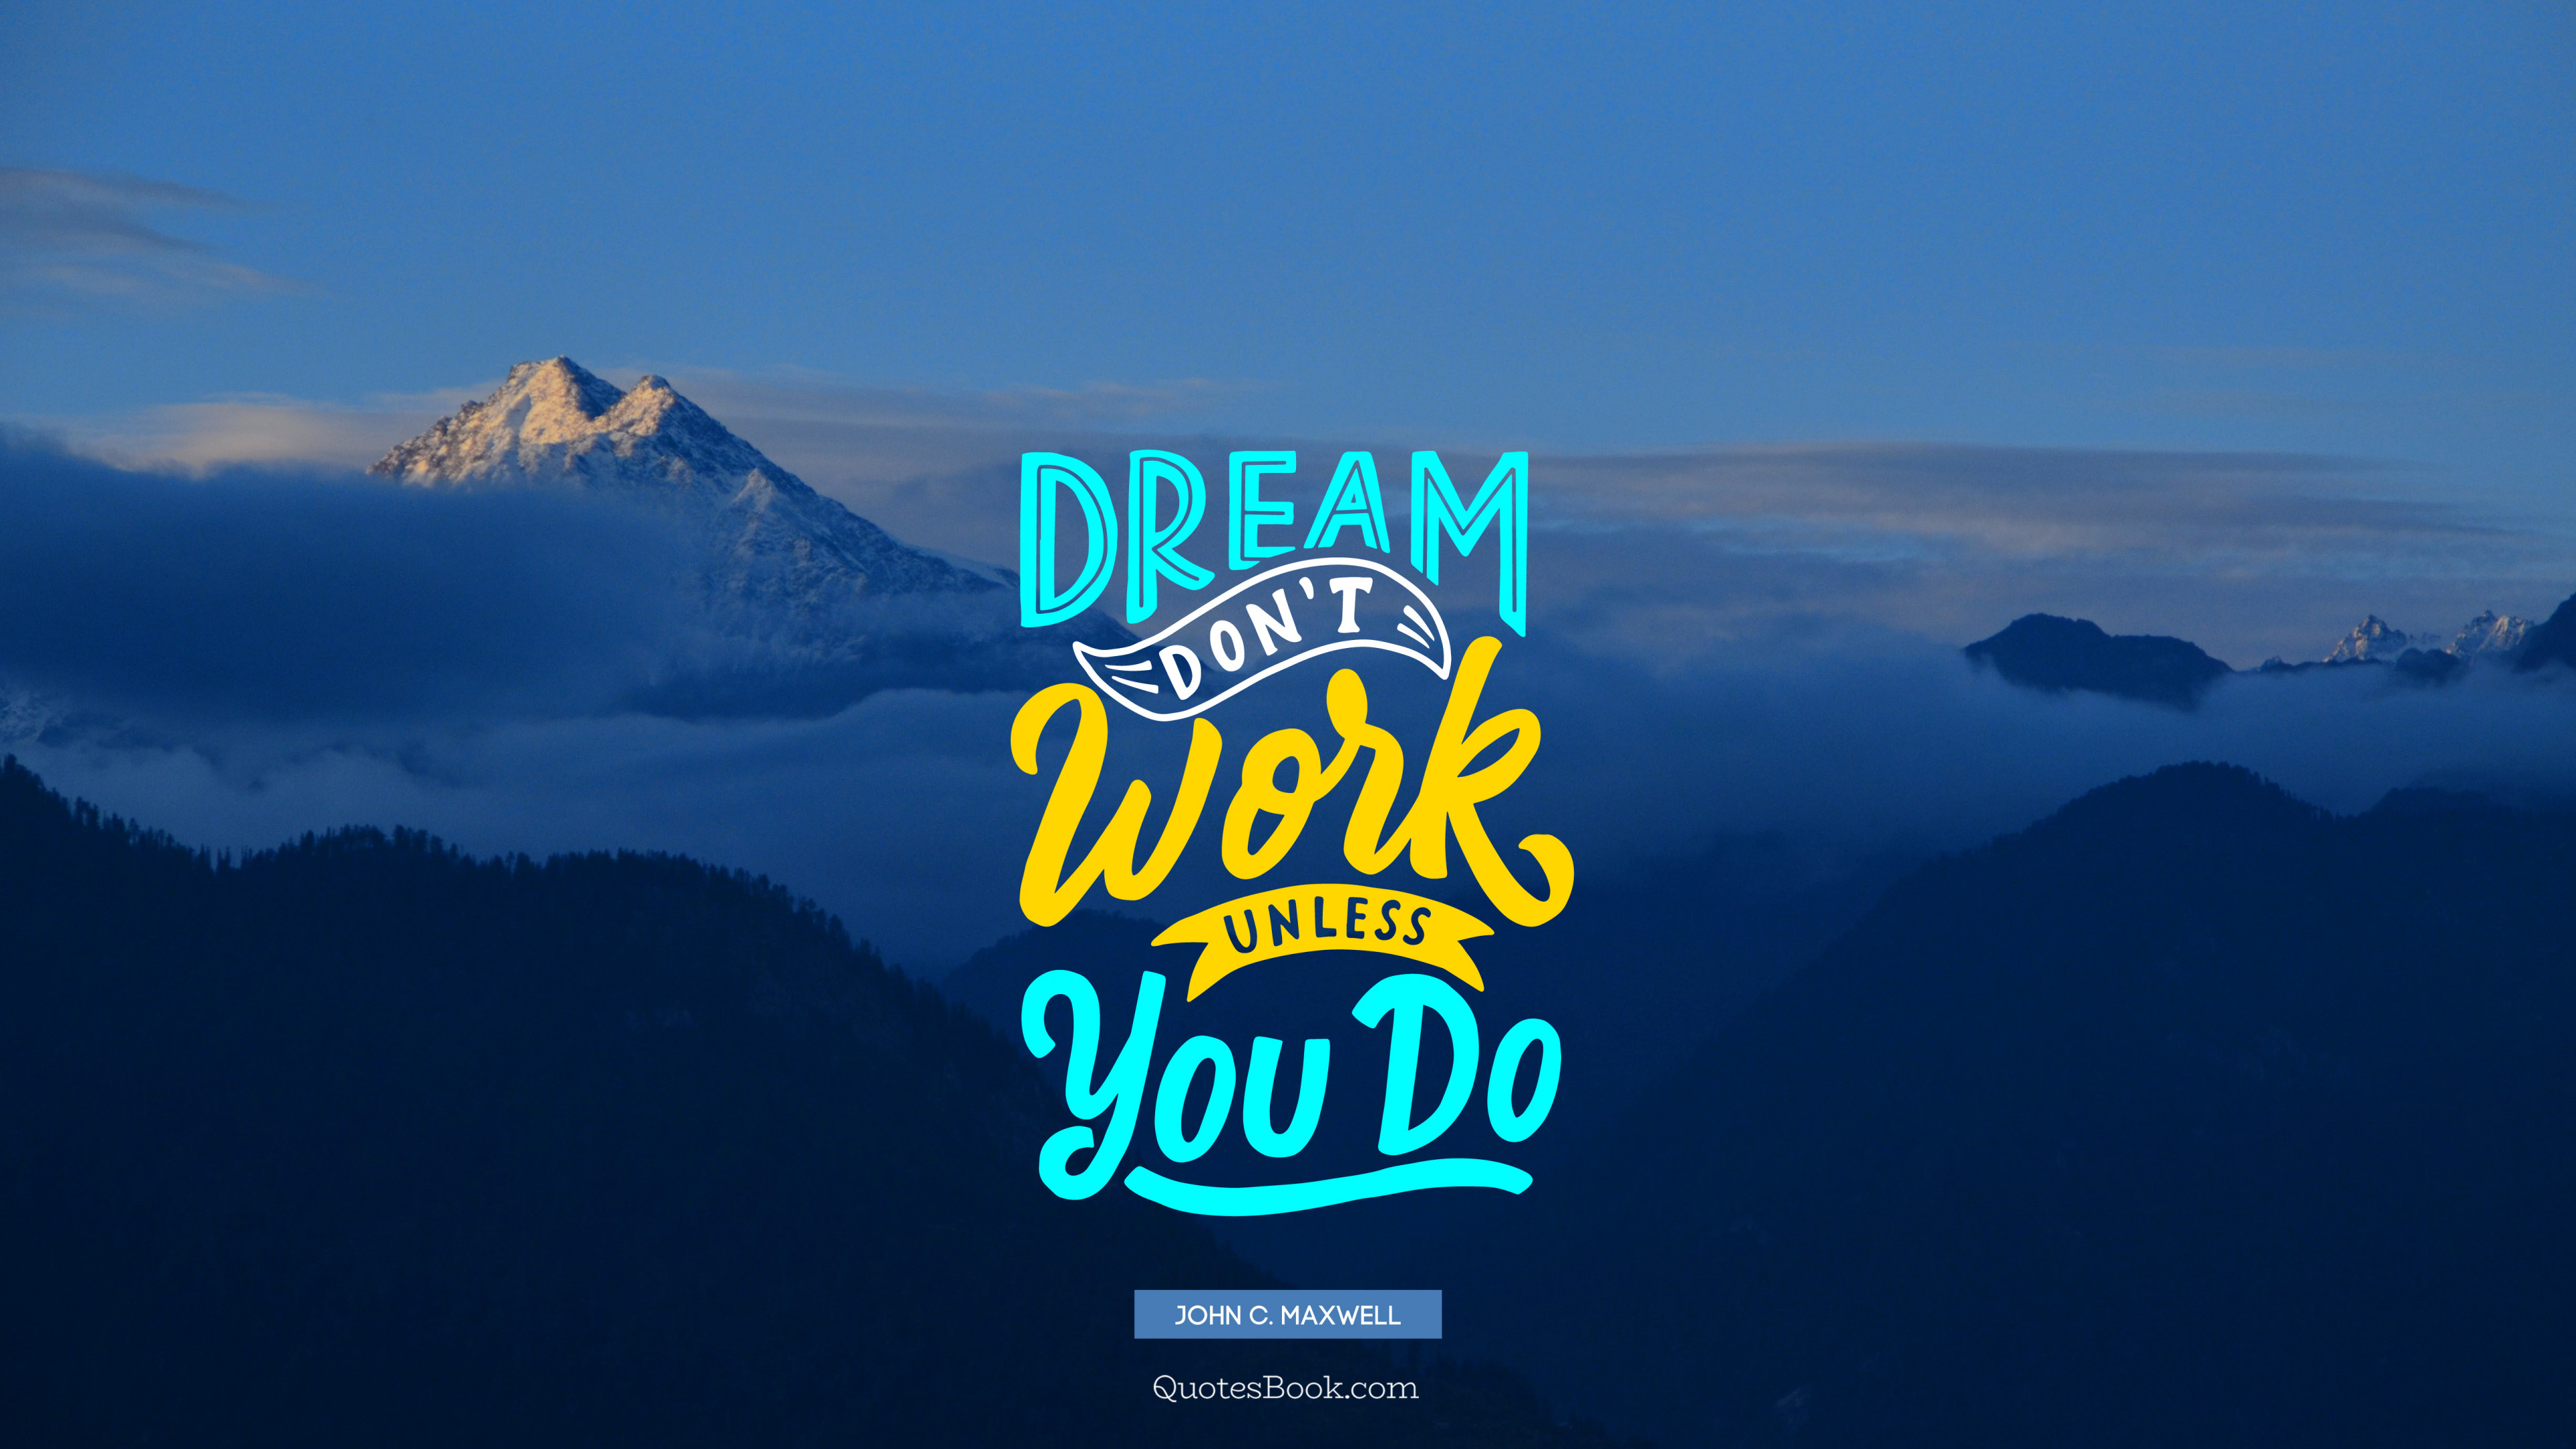 Dream don t work unless you do. - Quote by John C. Maxwell 